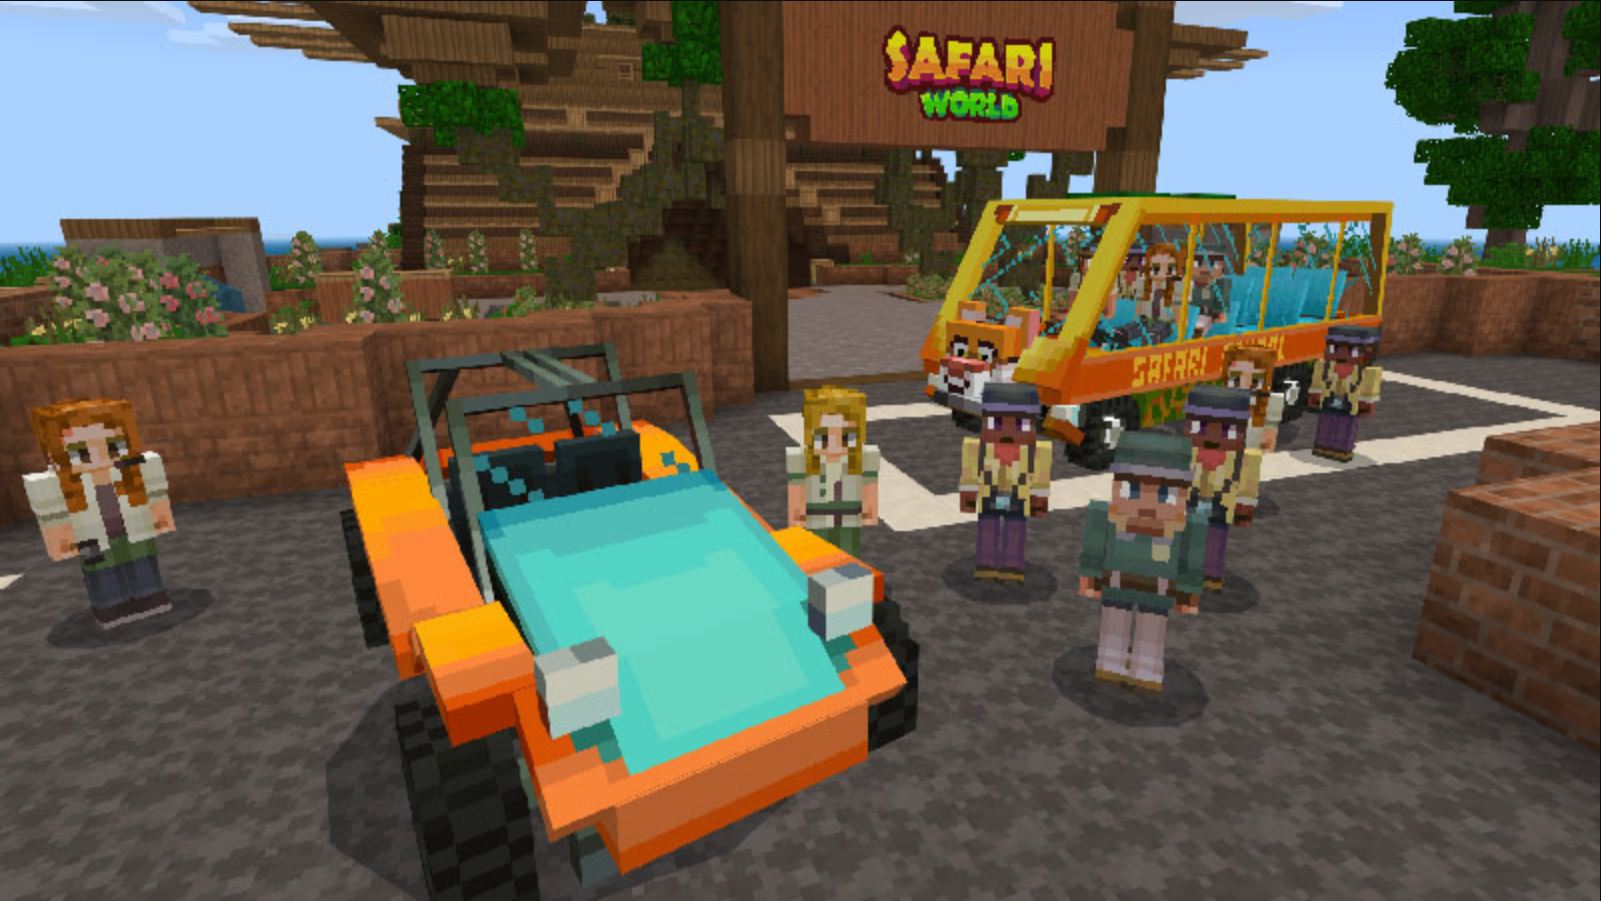 Minecraft Marketplace Explored: Safari World, For Players Who Might Want A Break From The Dinosaurs!